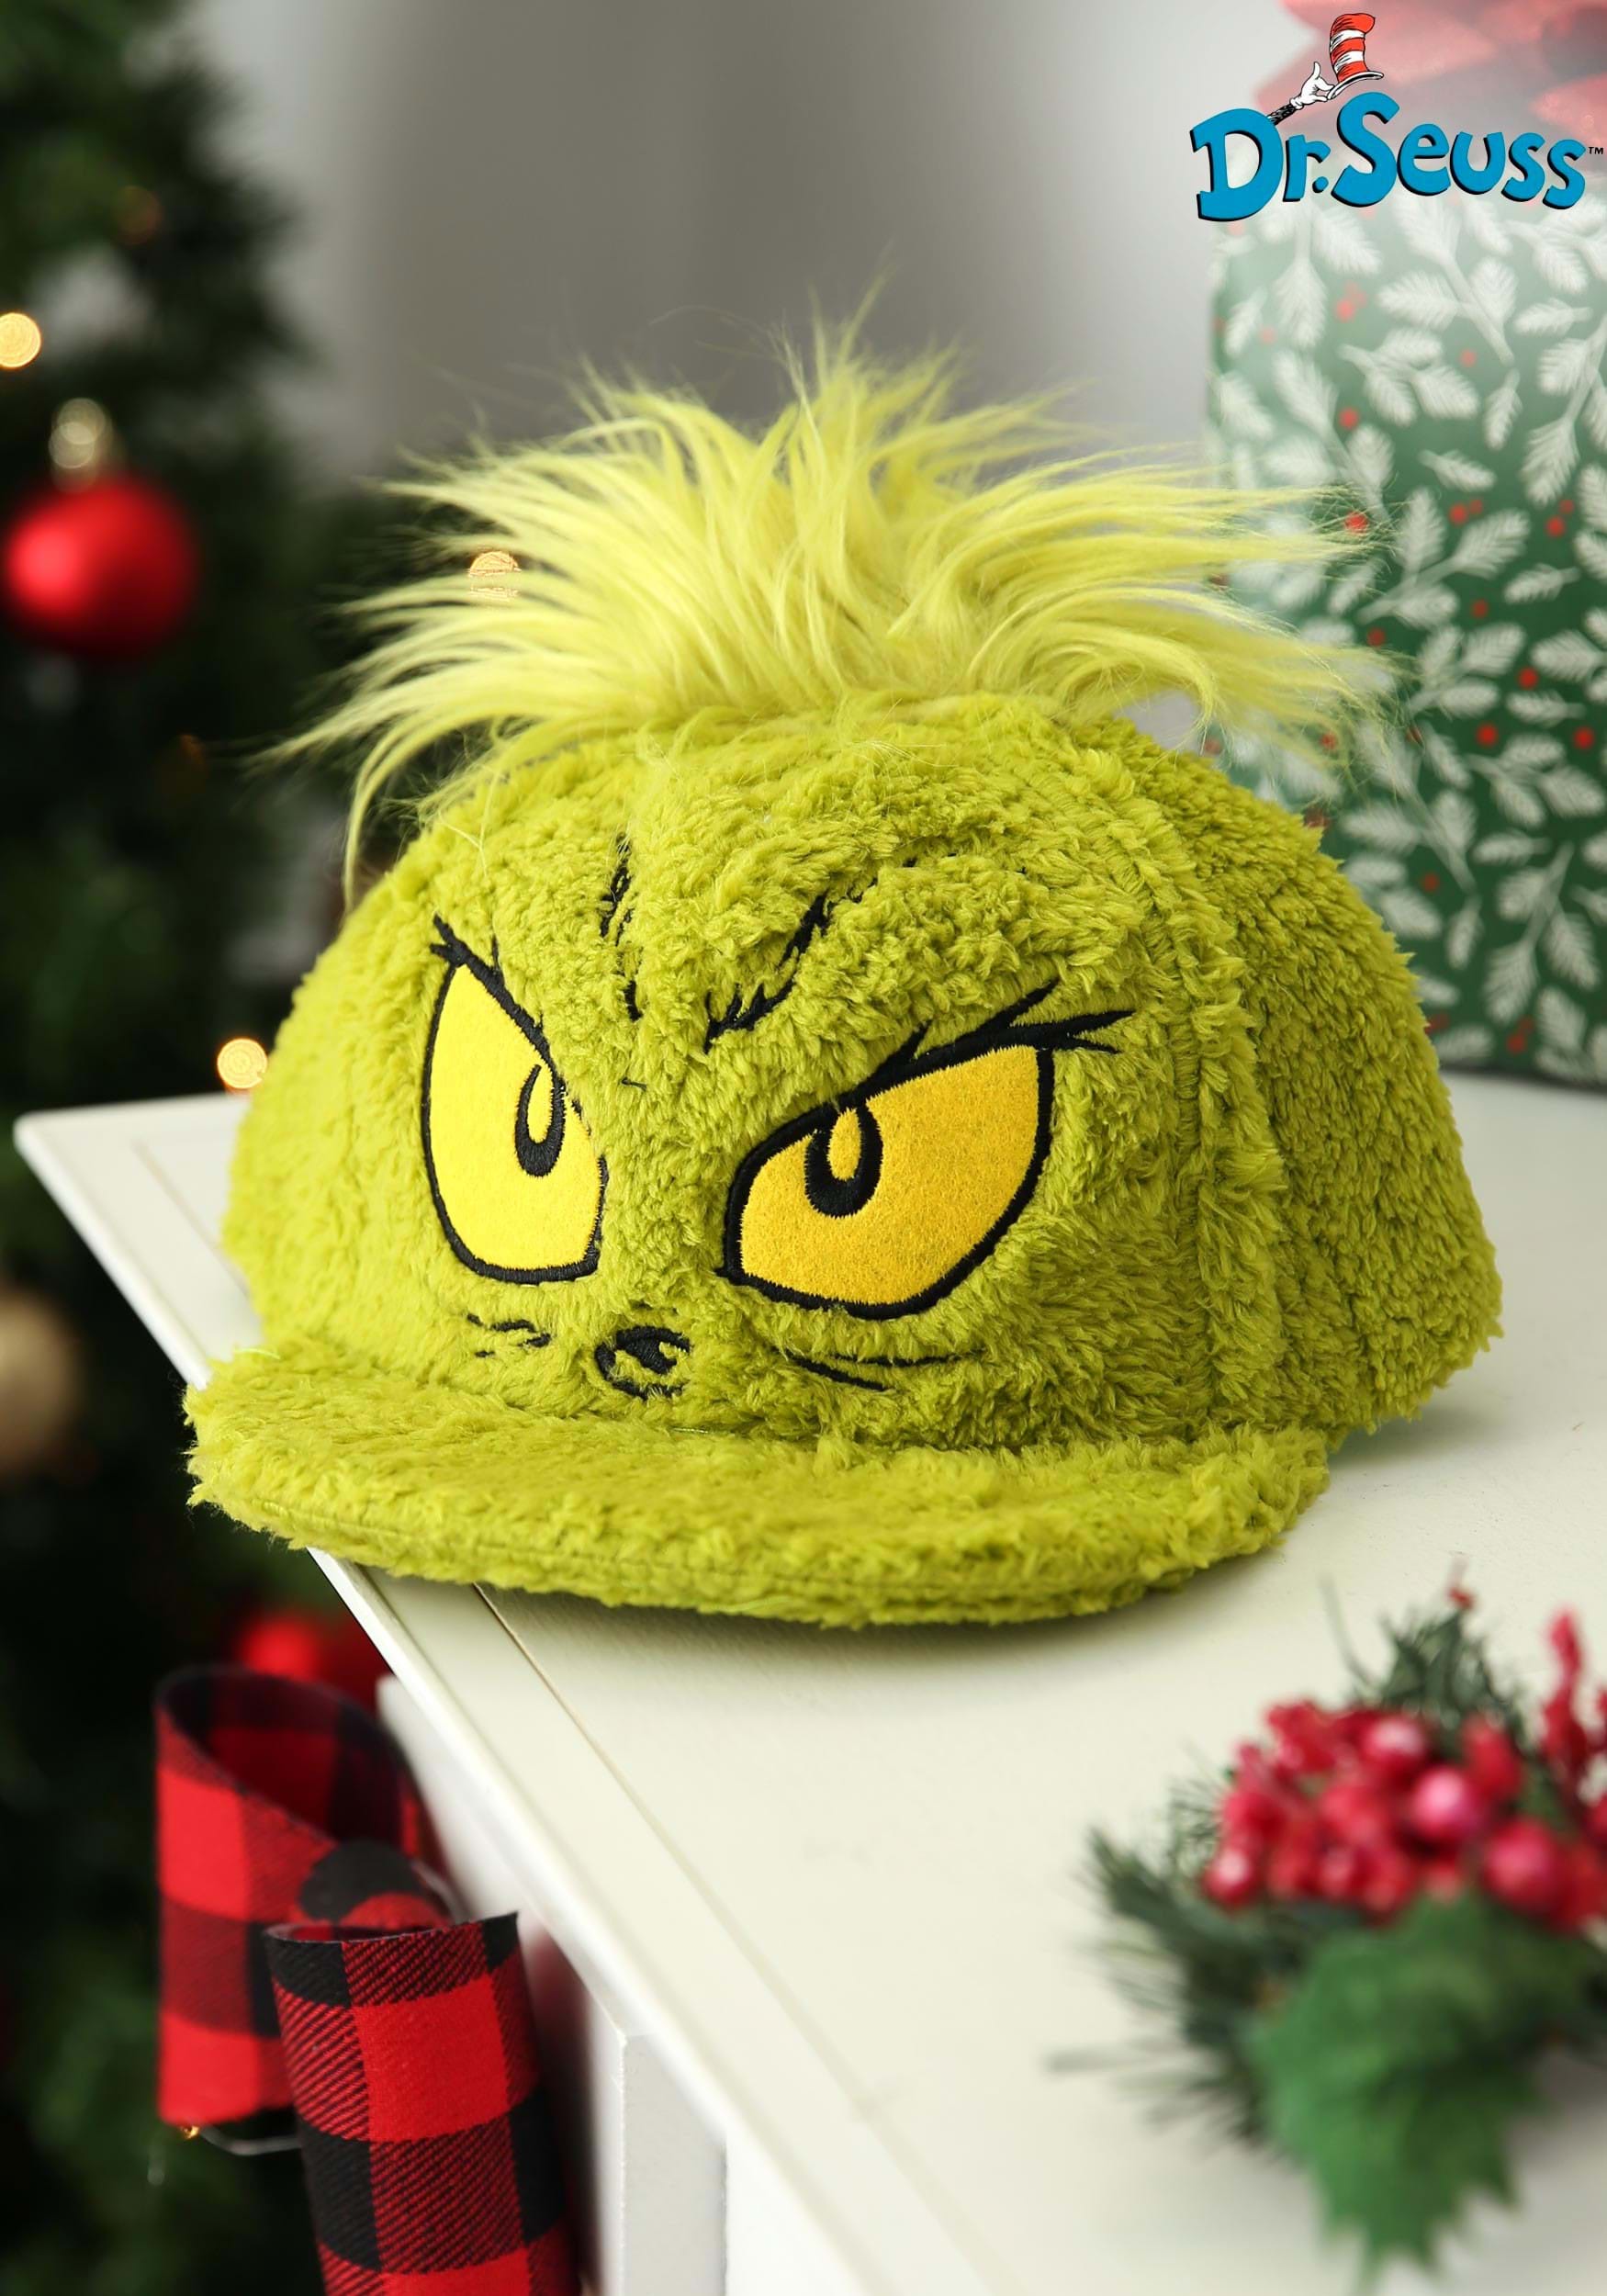 Dr. Seuss Grinch Hoodie Adult Hat - ACCESSORIES - COSTUMES